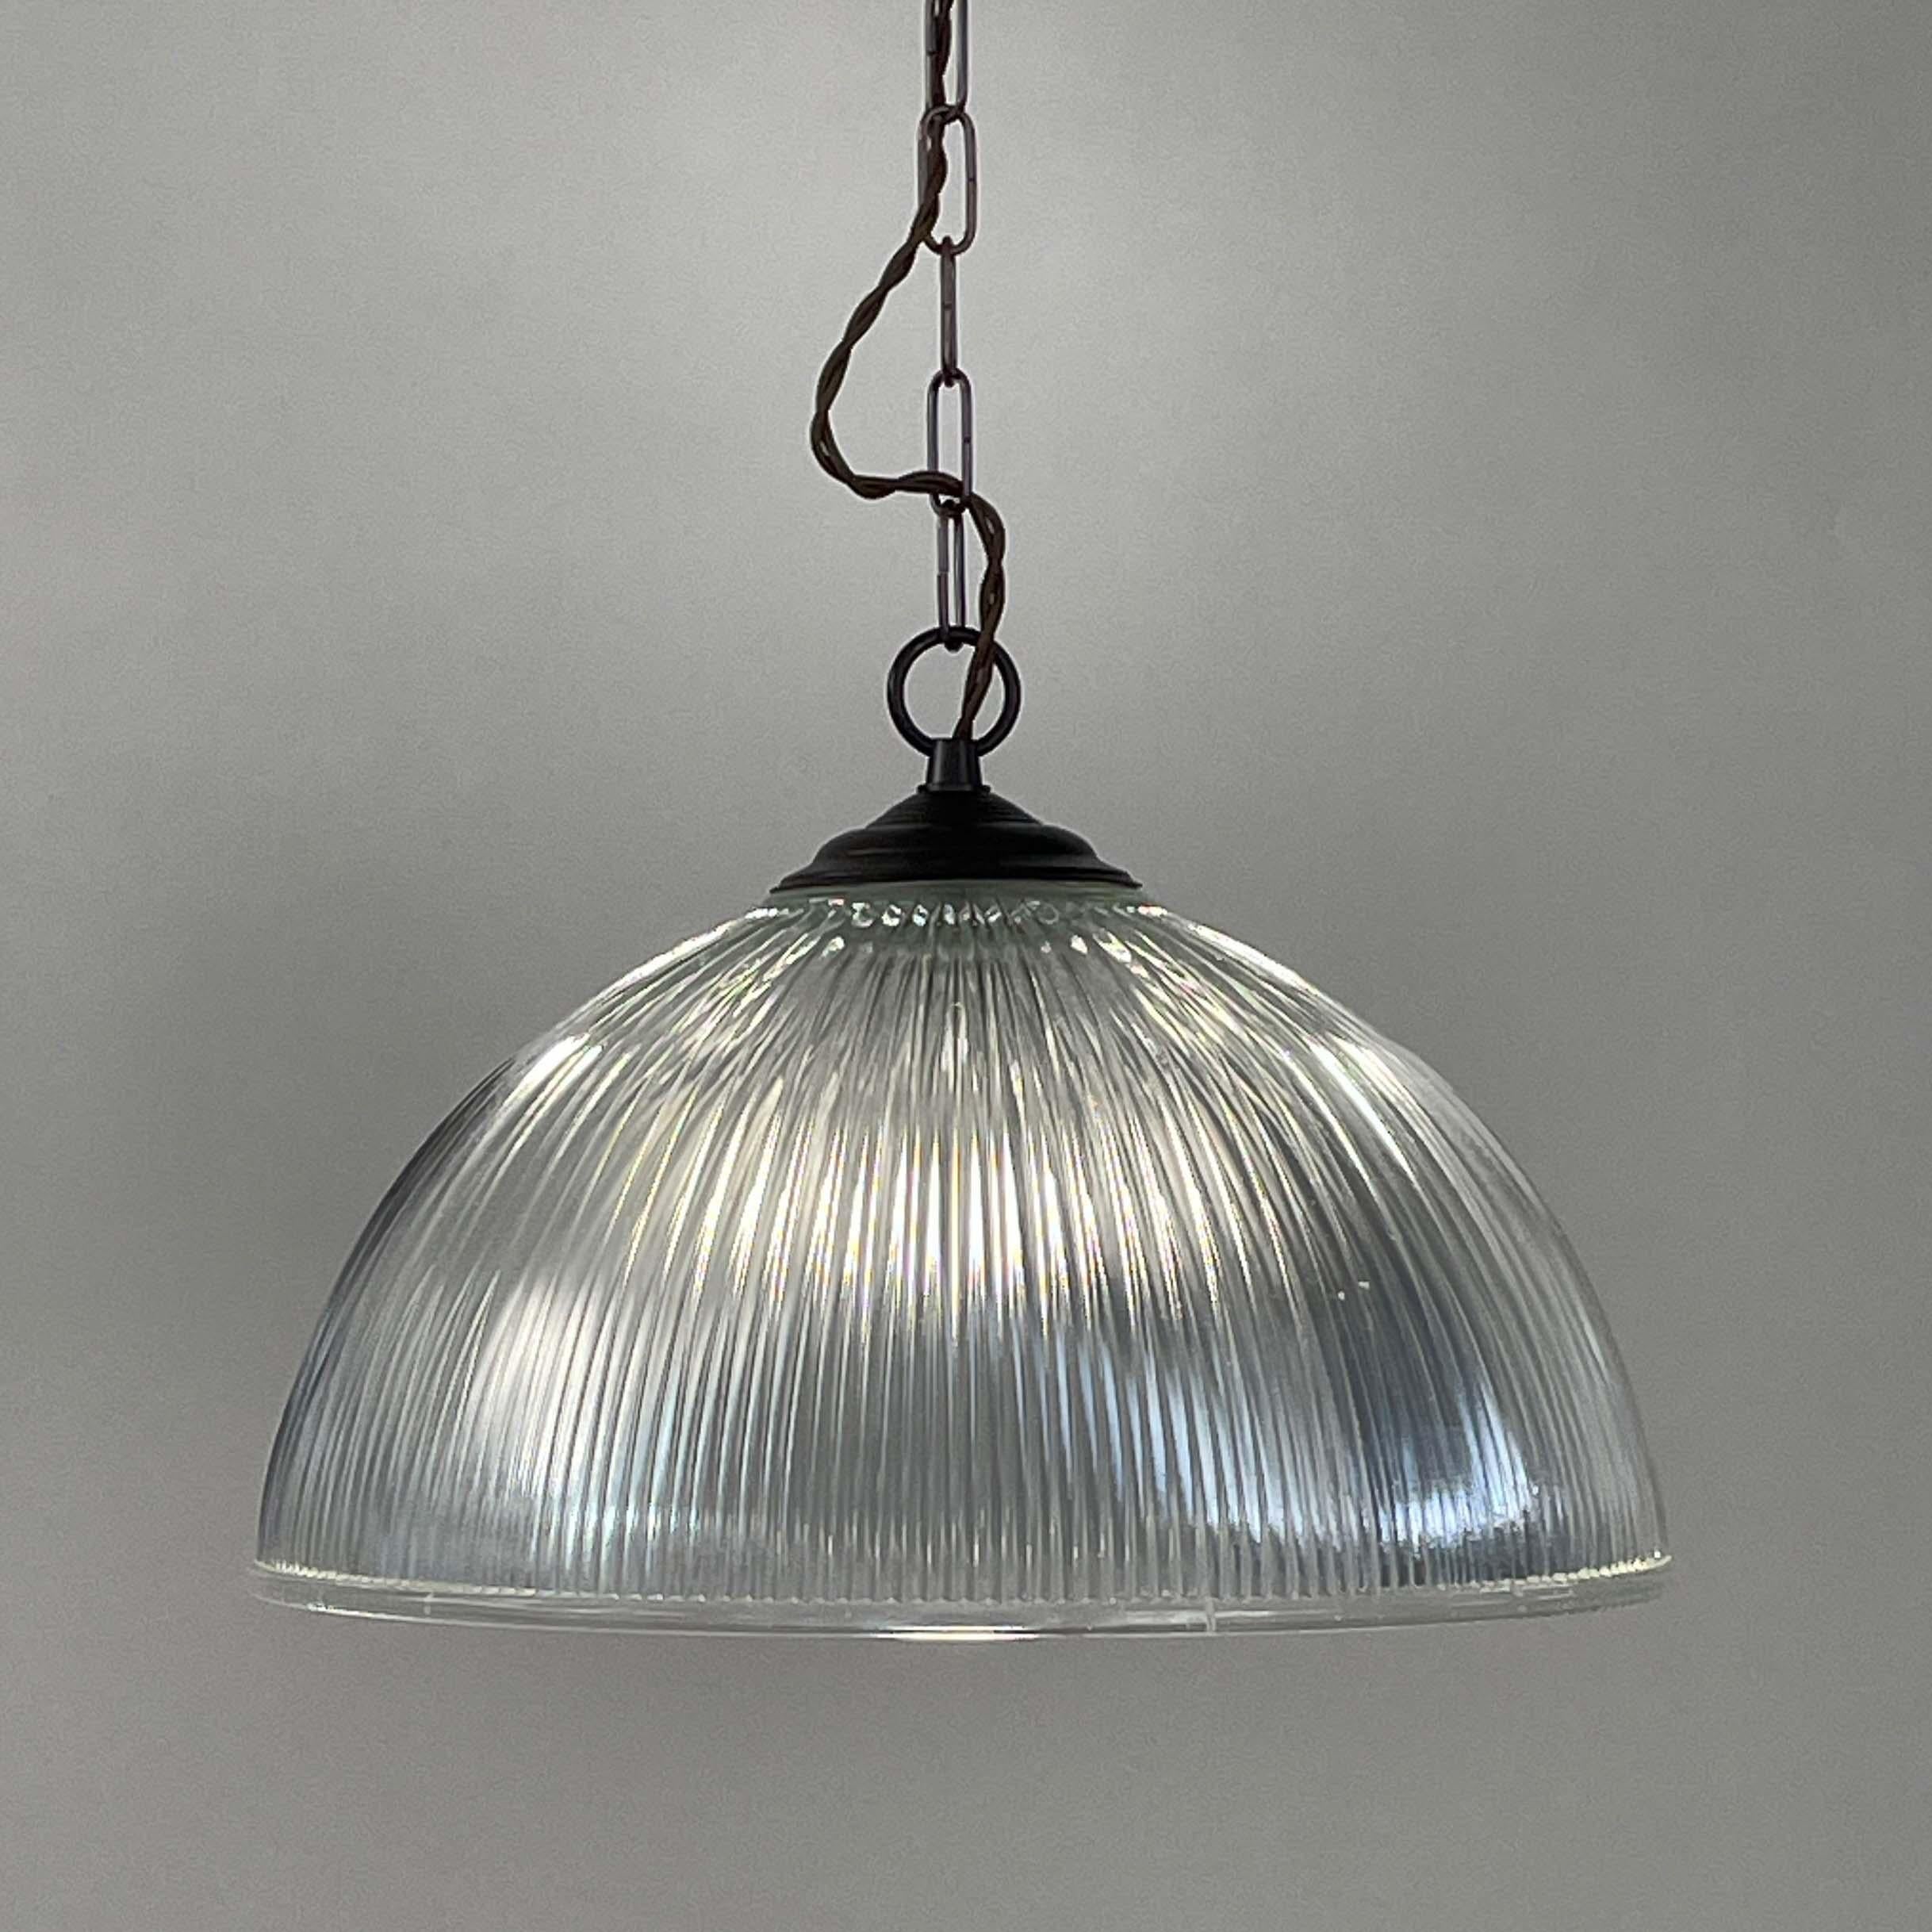 Mid-20th Century Art Deco Holophane Industrial Glass Pendant Lamp, France, 1930s For Sale